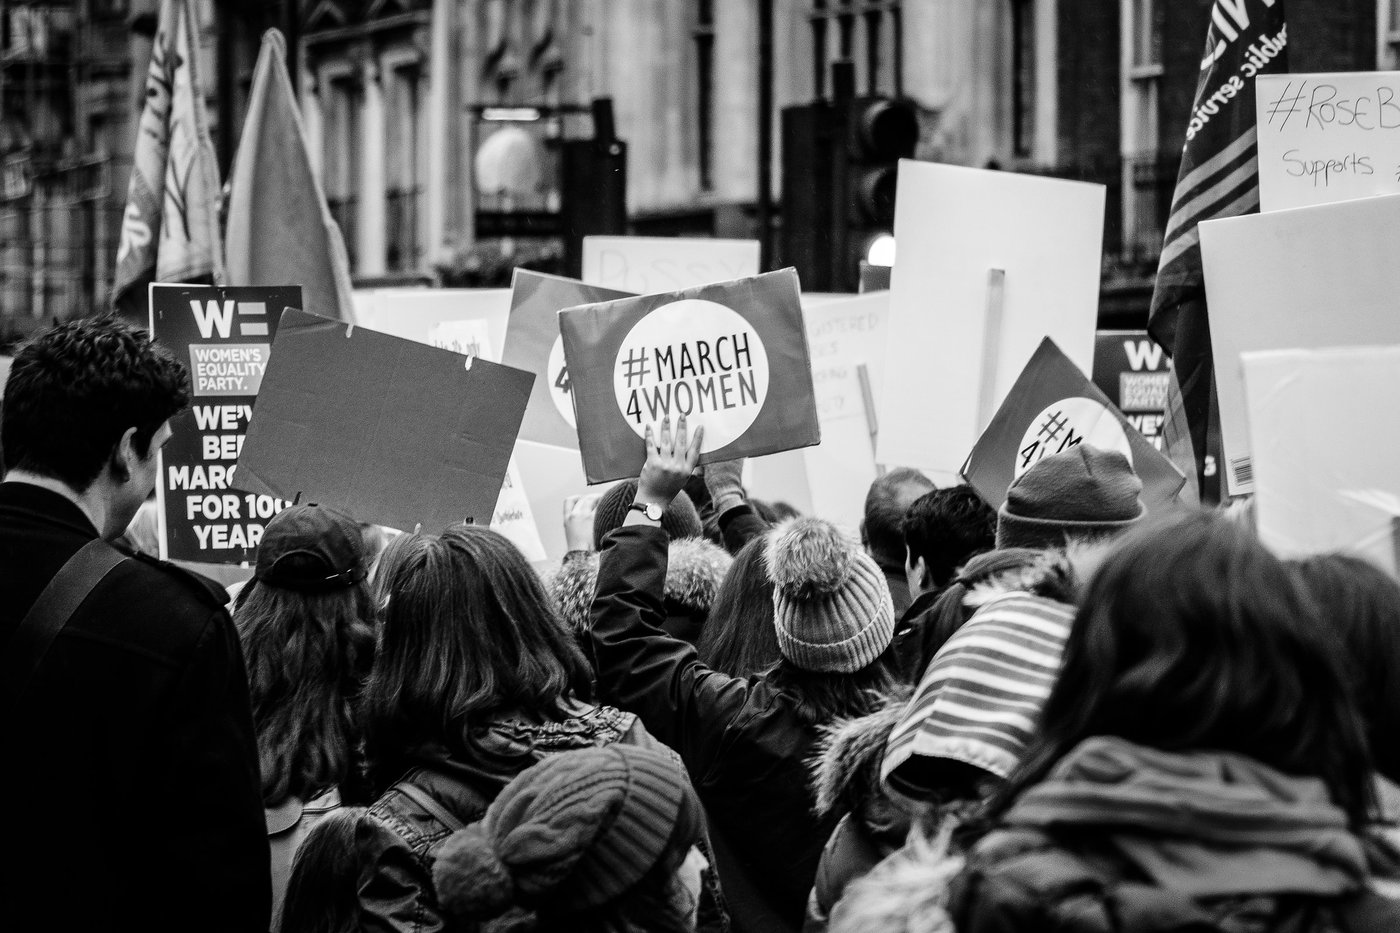 Black and white image of of a group of protesters, seen from behind. All are holding up placards, the most visible one in the cenbtre of the image reads 'March 4 Women'